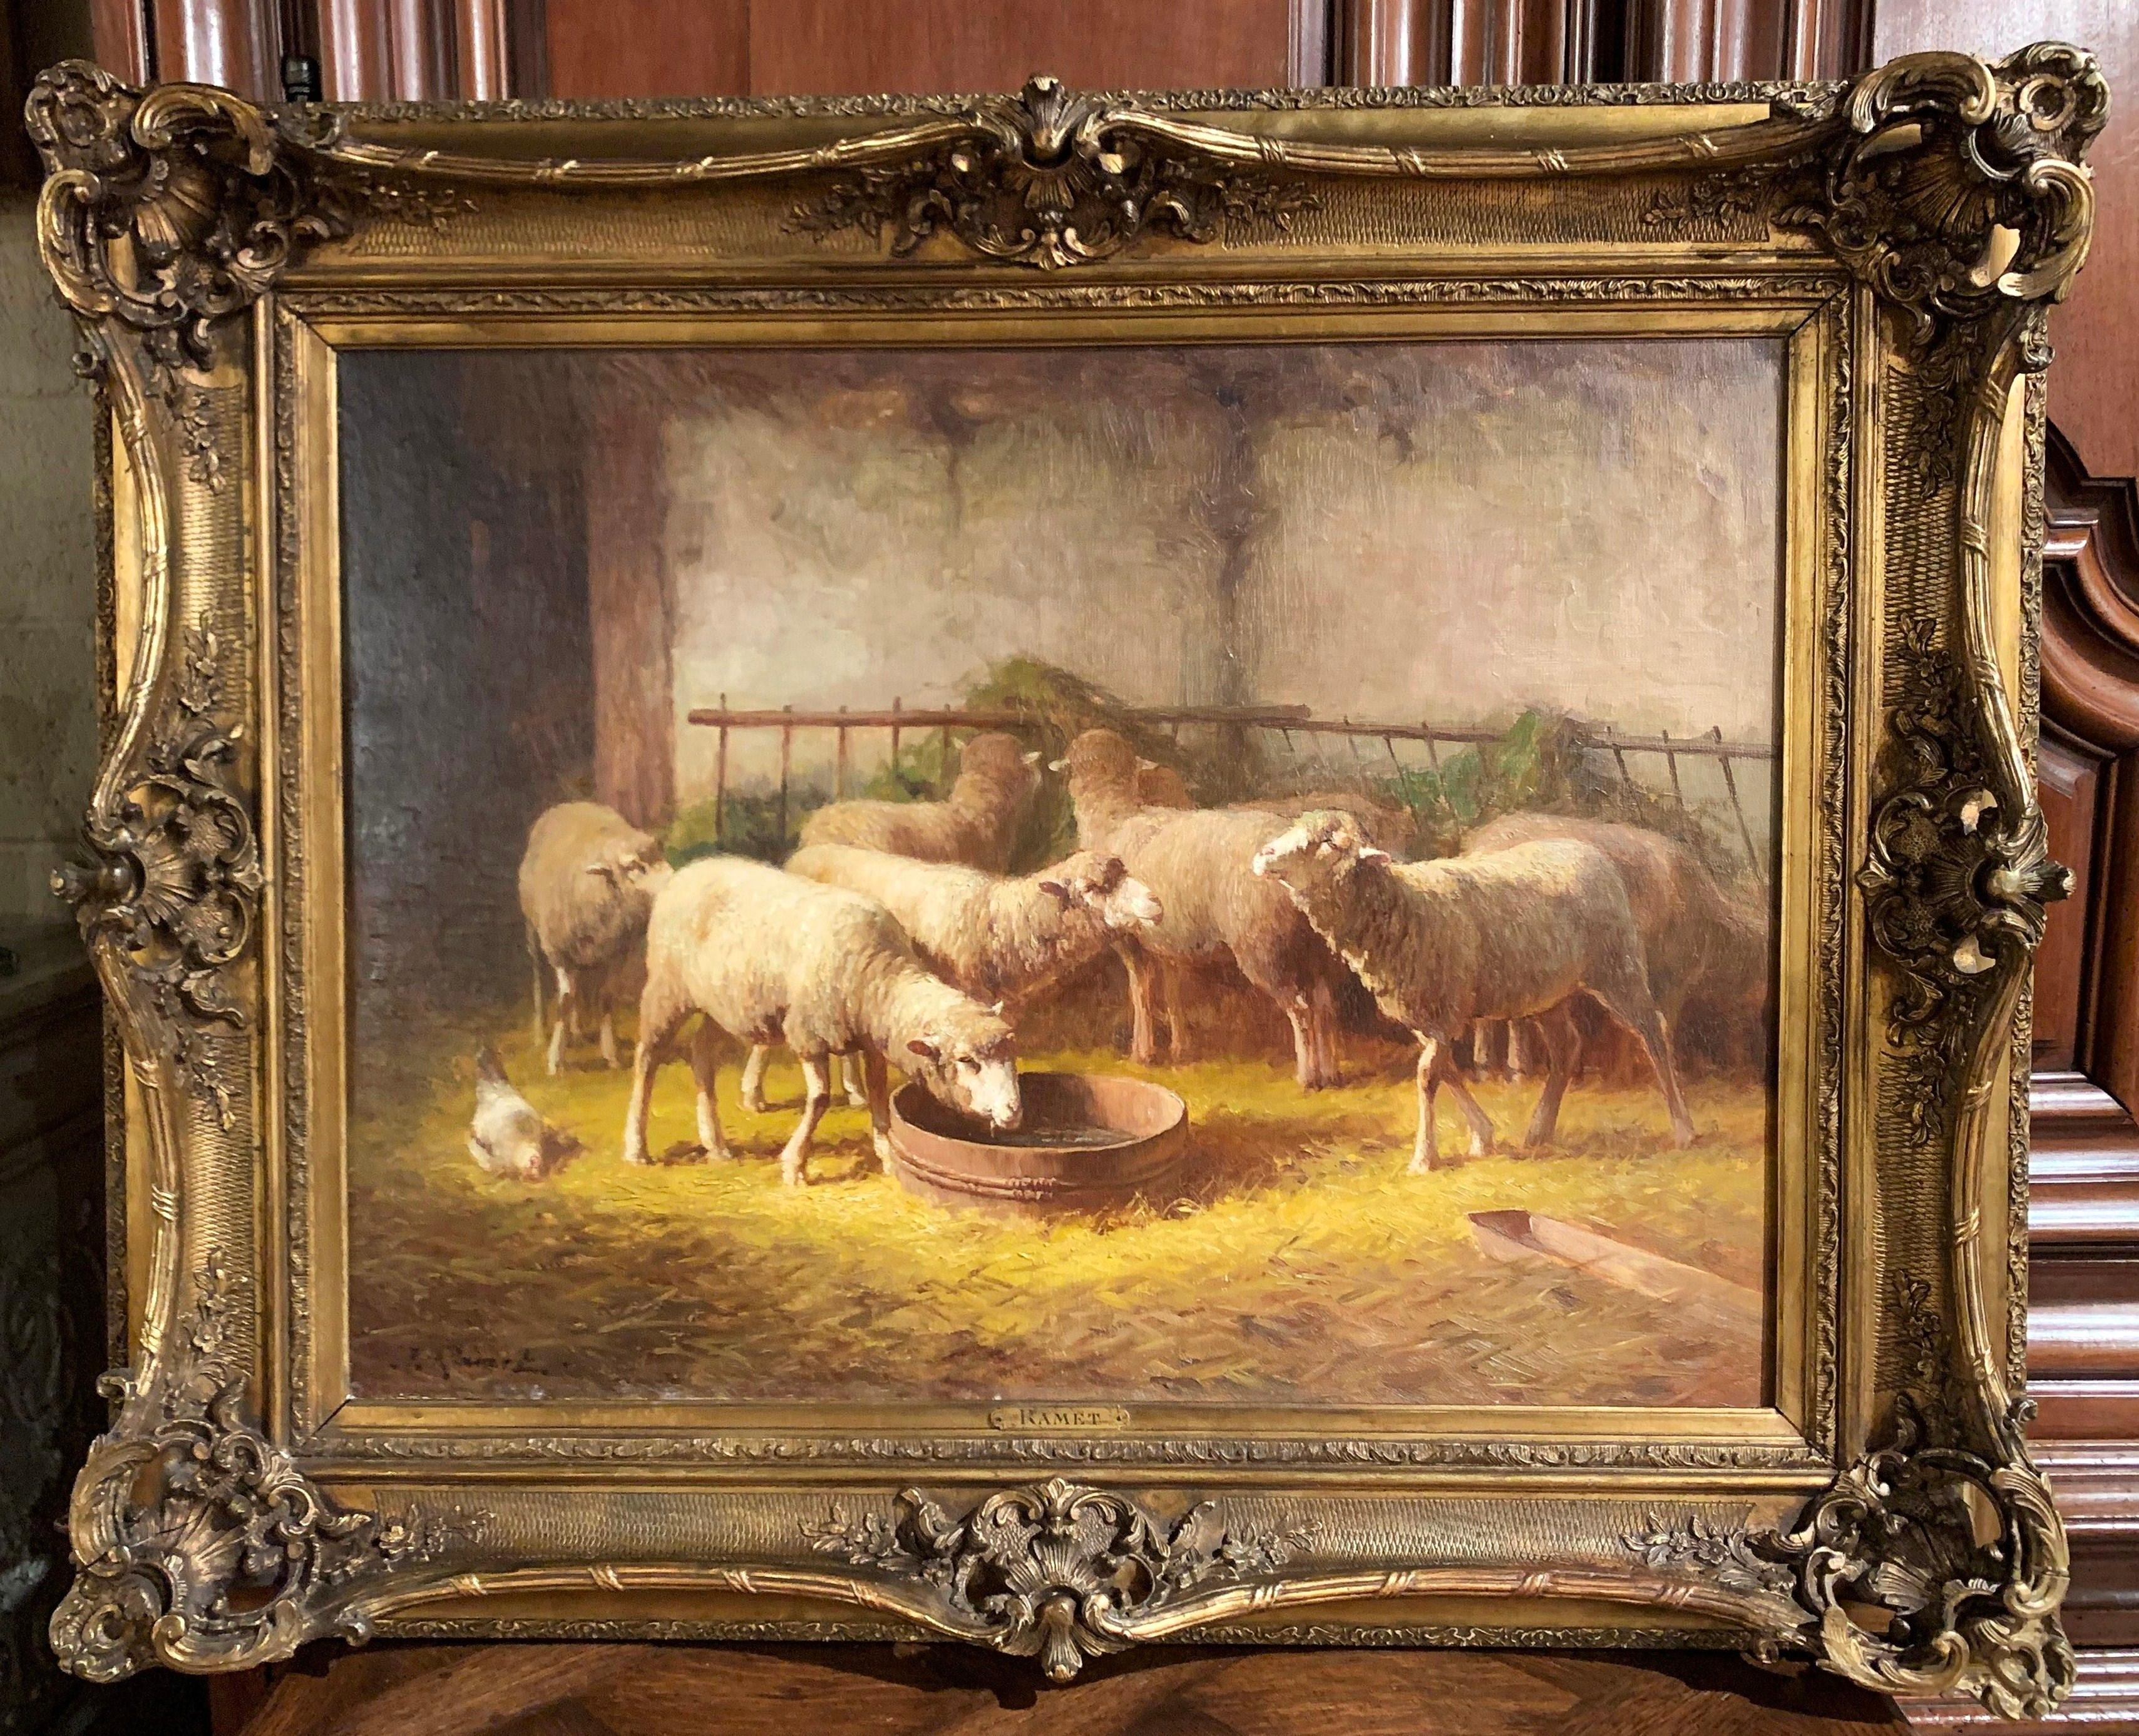 19th Century French Oil on Canvas Sheep Painting in Gilt Frame Signed J. Ramet 1